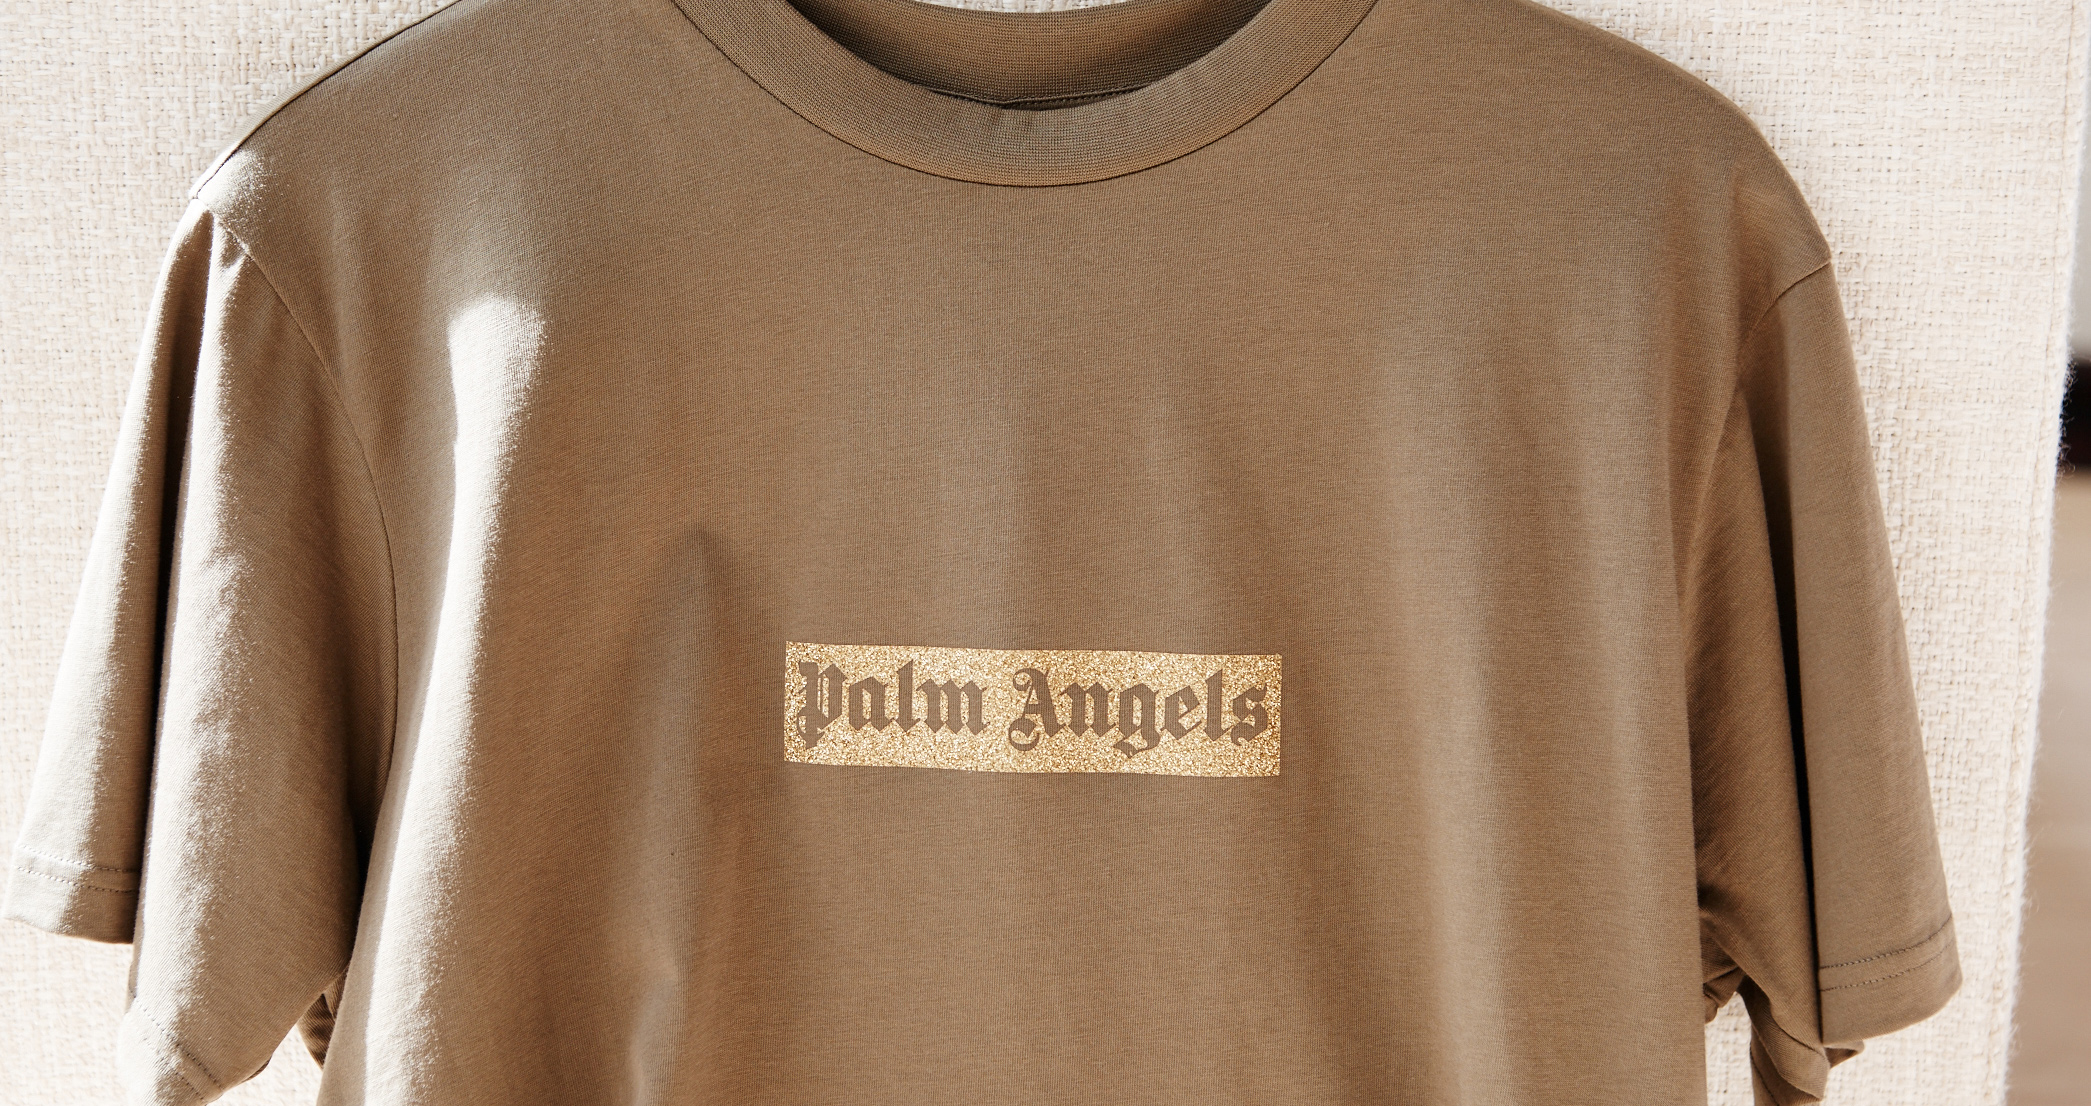 shirts with angels on them